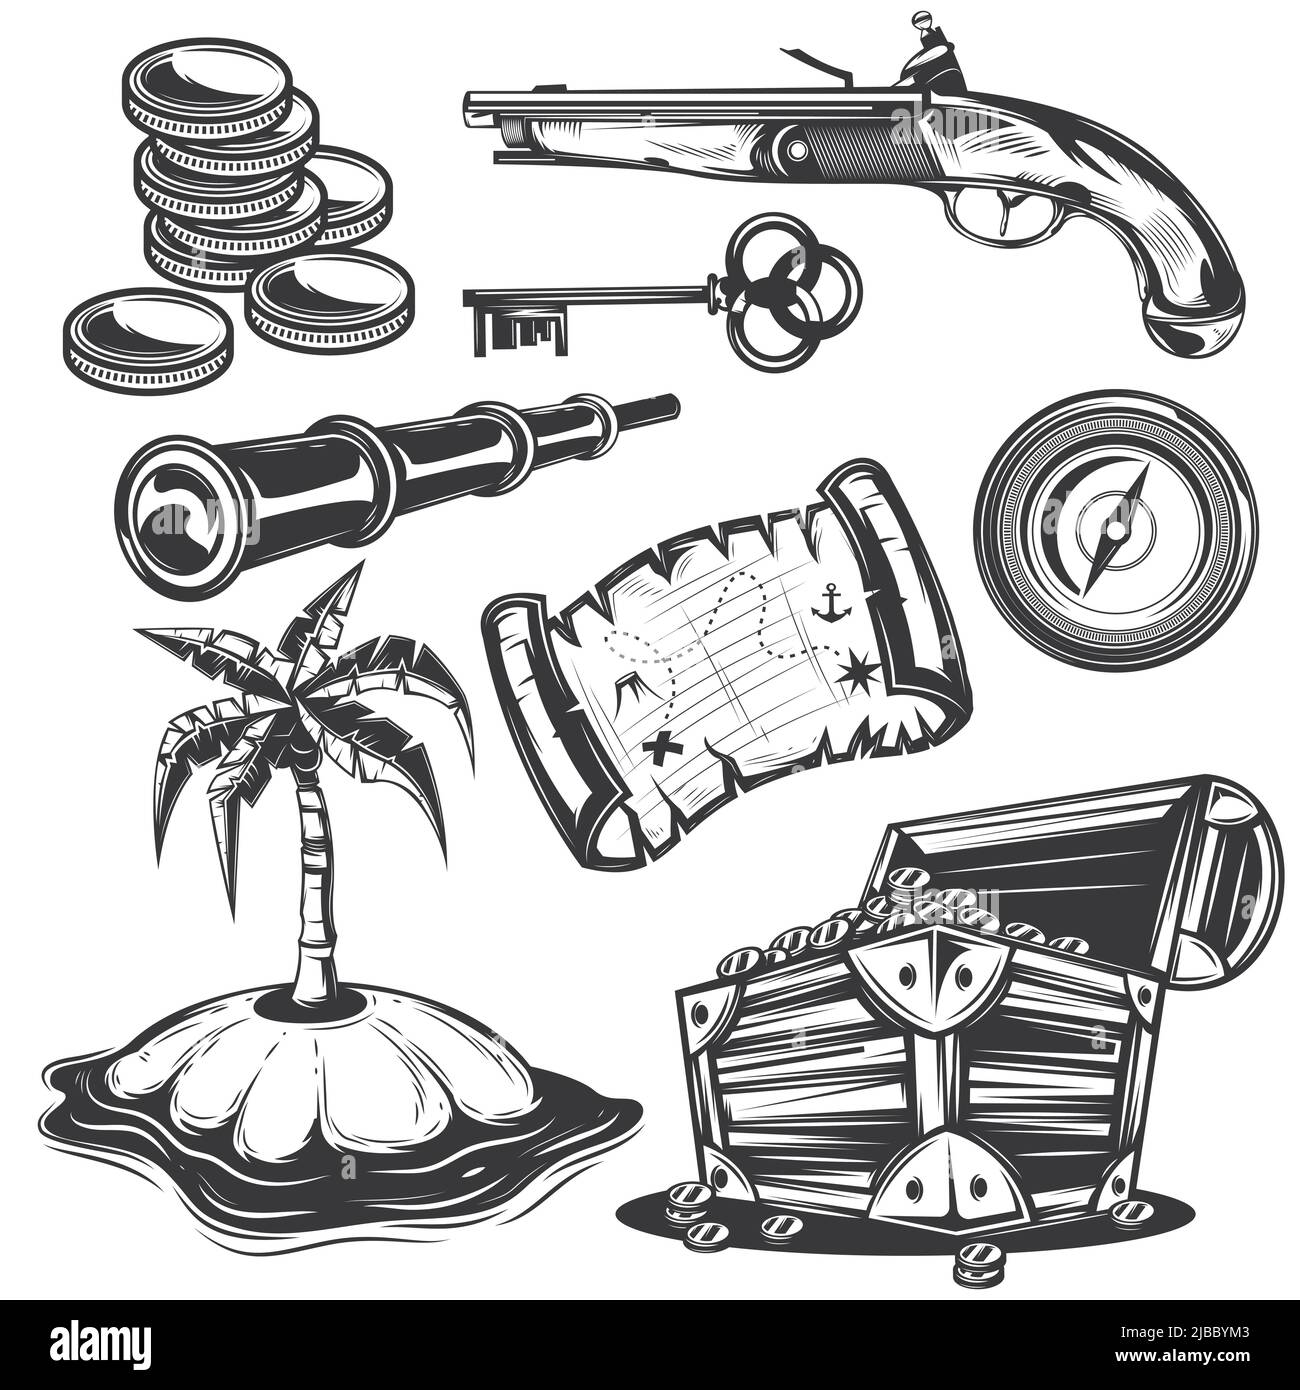 Set of treasure elements for creating your own badges, logos, labels, posters etc. Isolated on white. Stock Vector